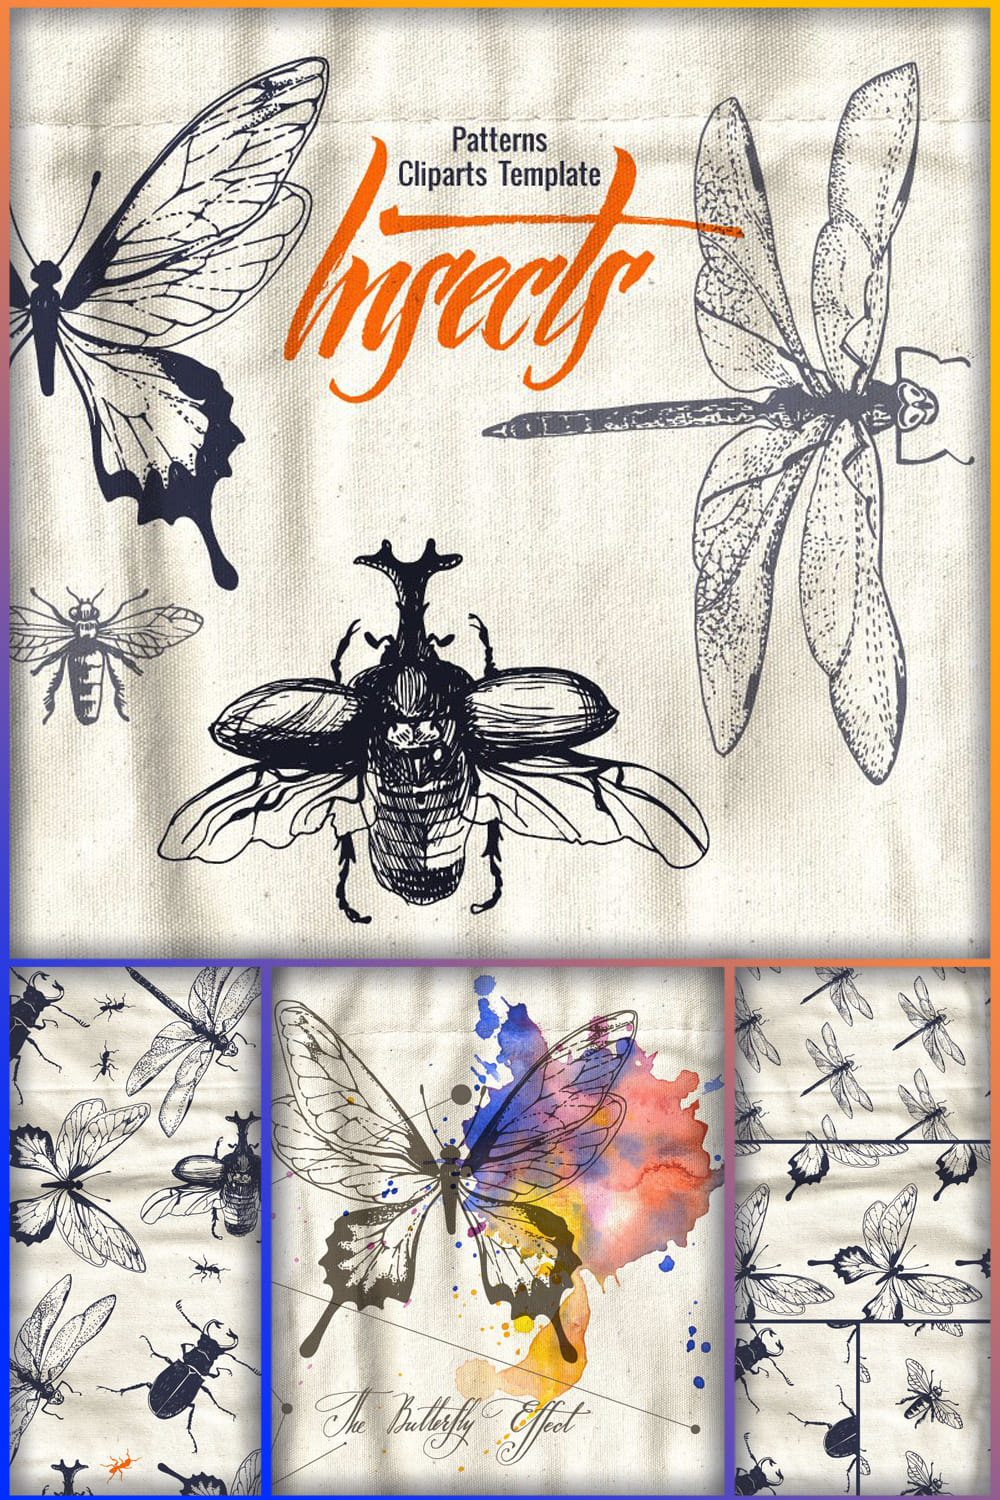 insects in patterns and cliparts pinterest 1000 1500